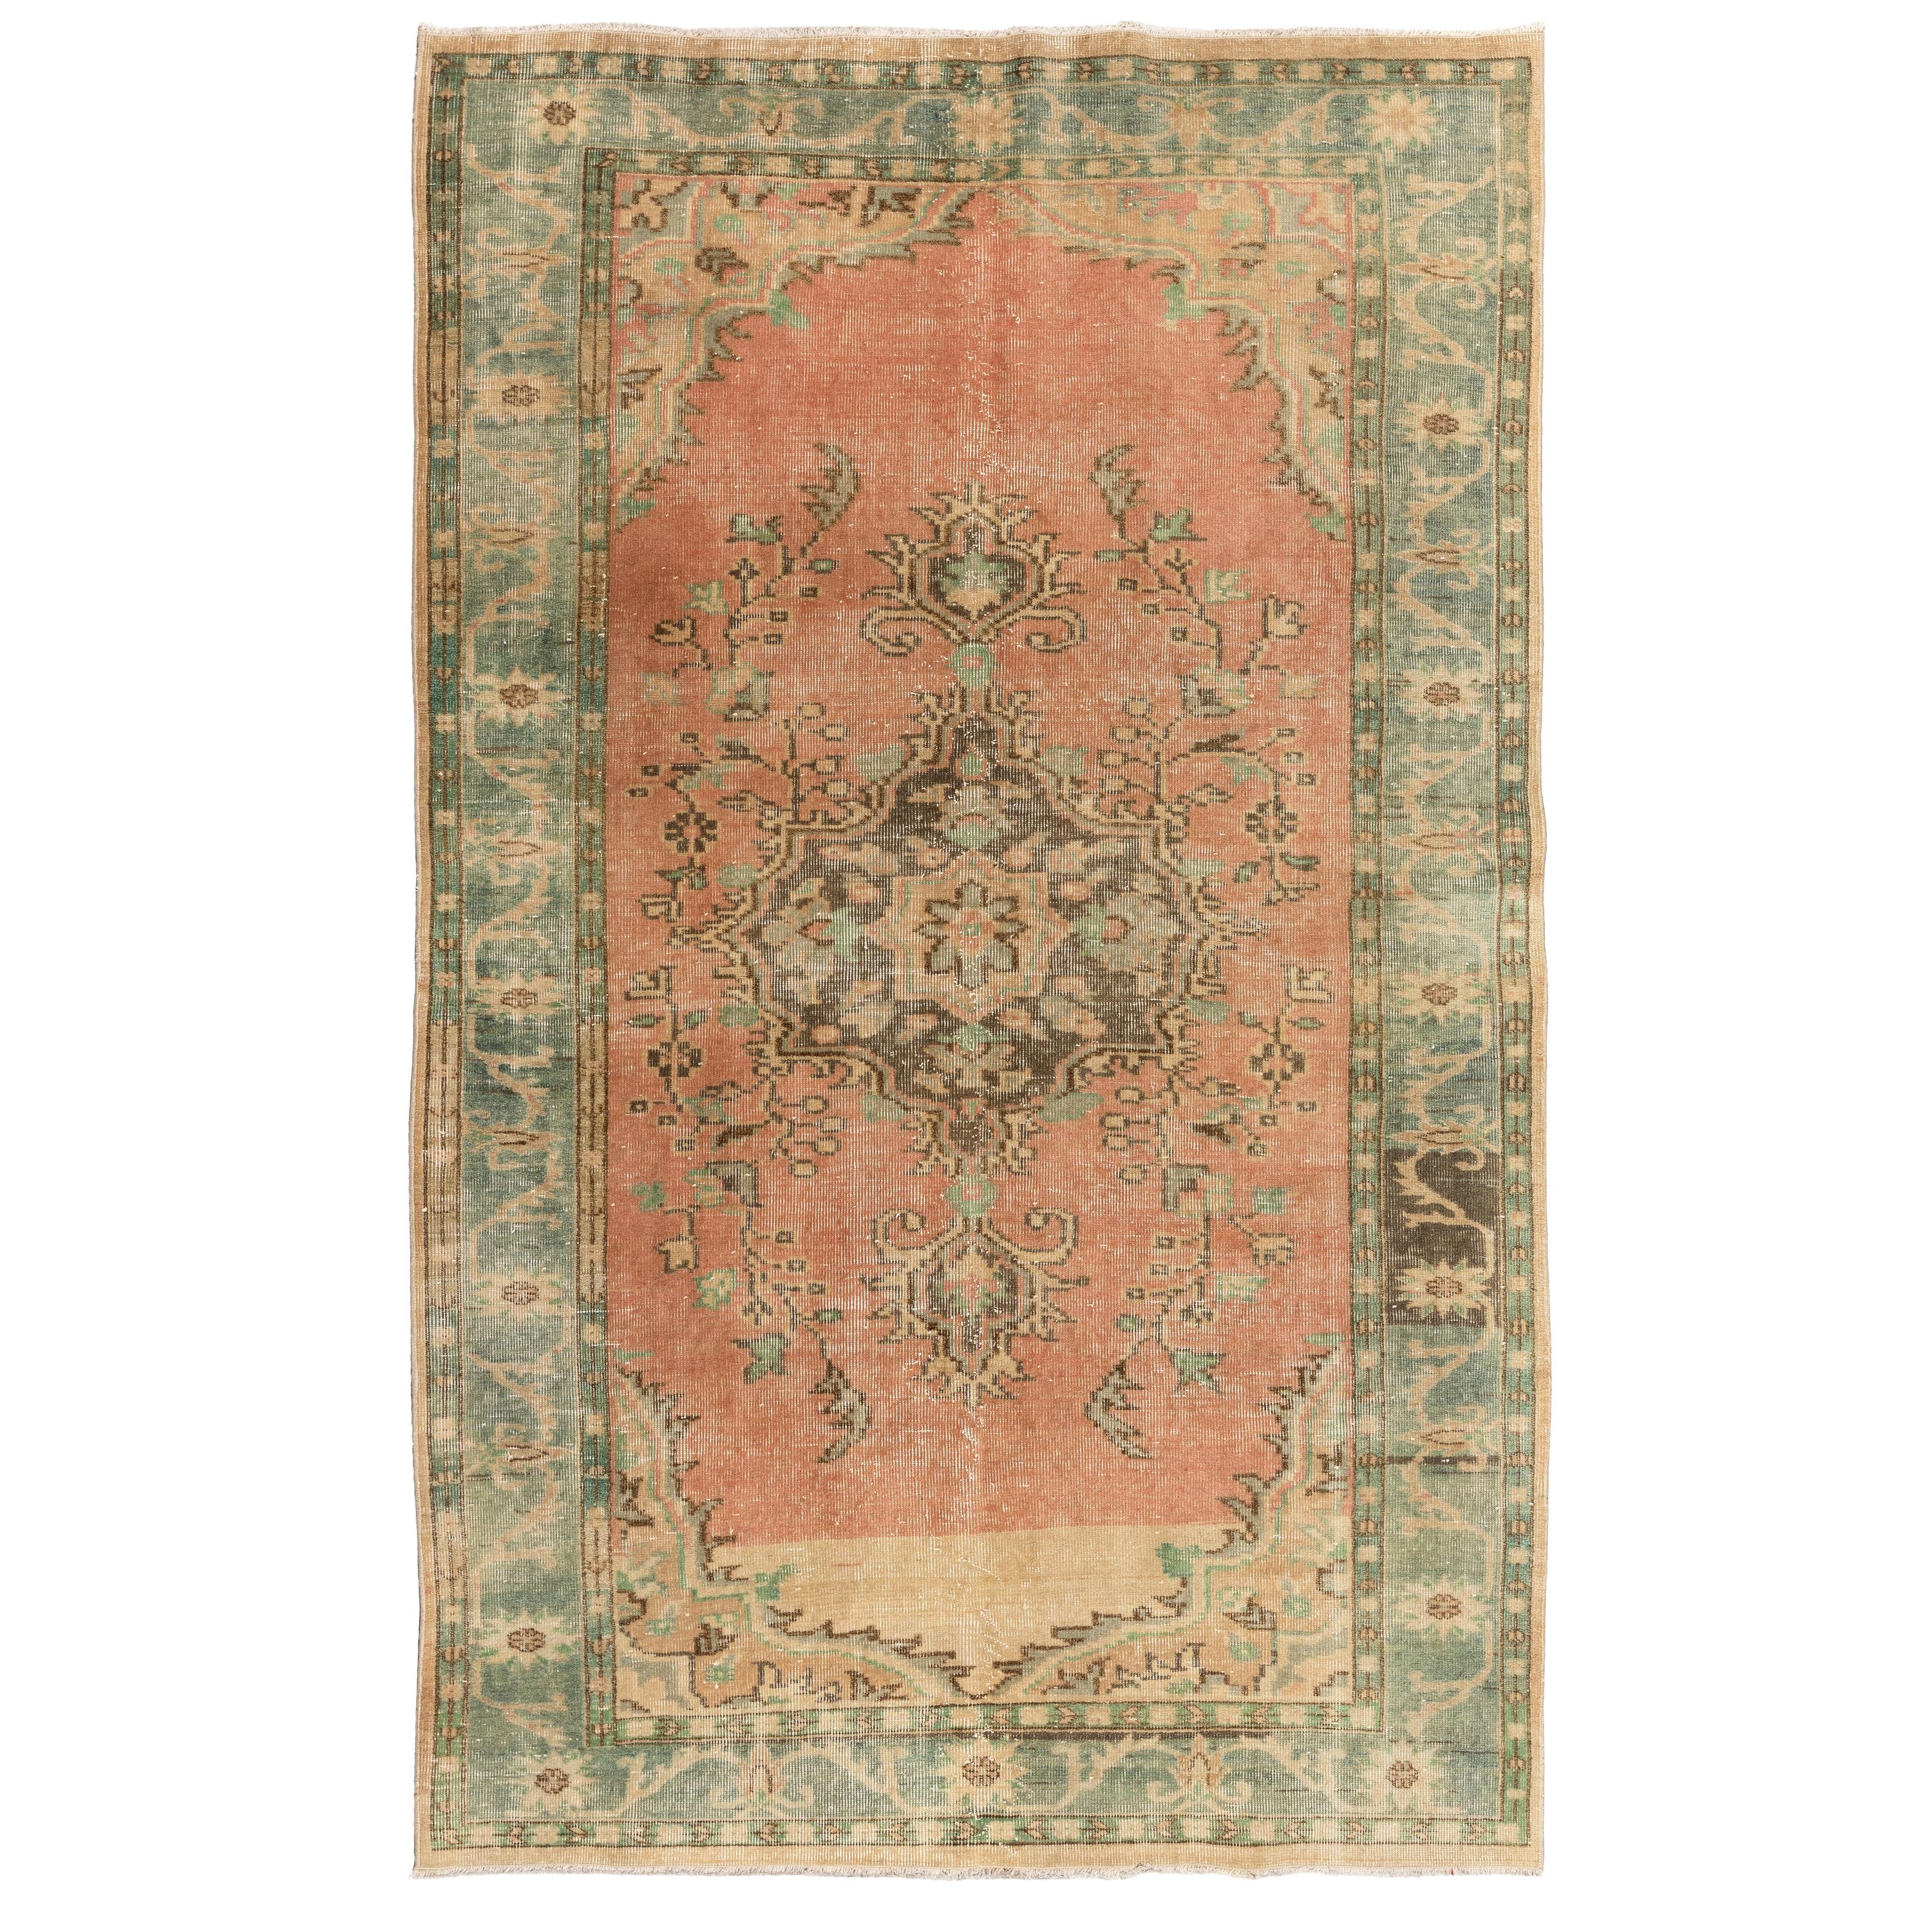 6x9.4 Ft Vintage Medallion Oushak Rug with Soft Peach, Green, Sand, Brown Colors